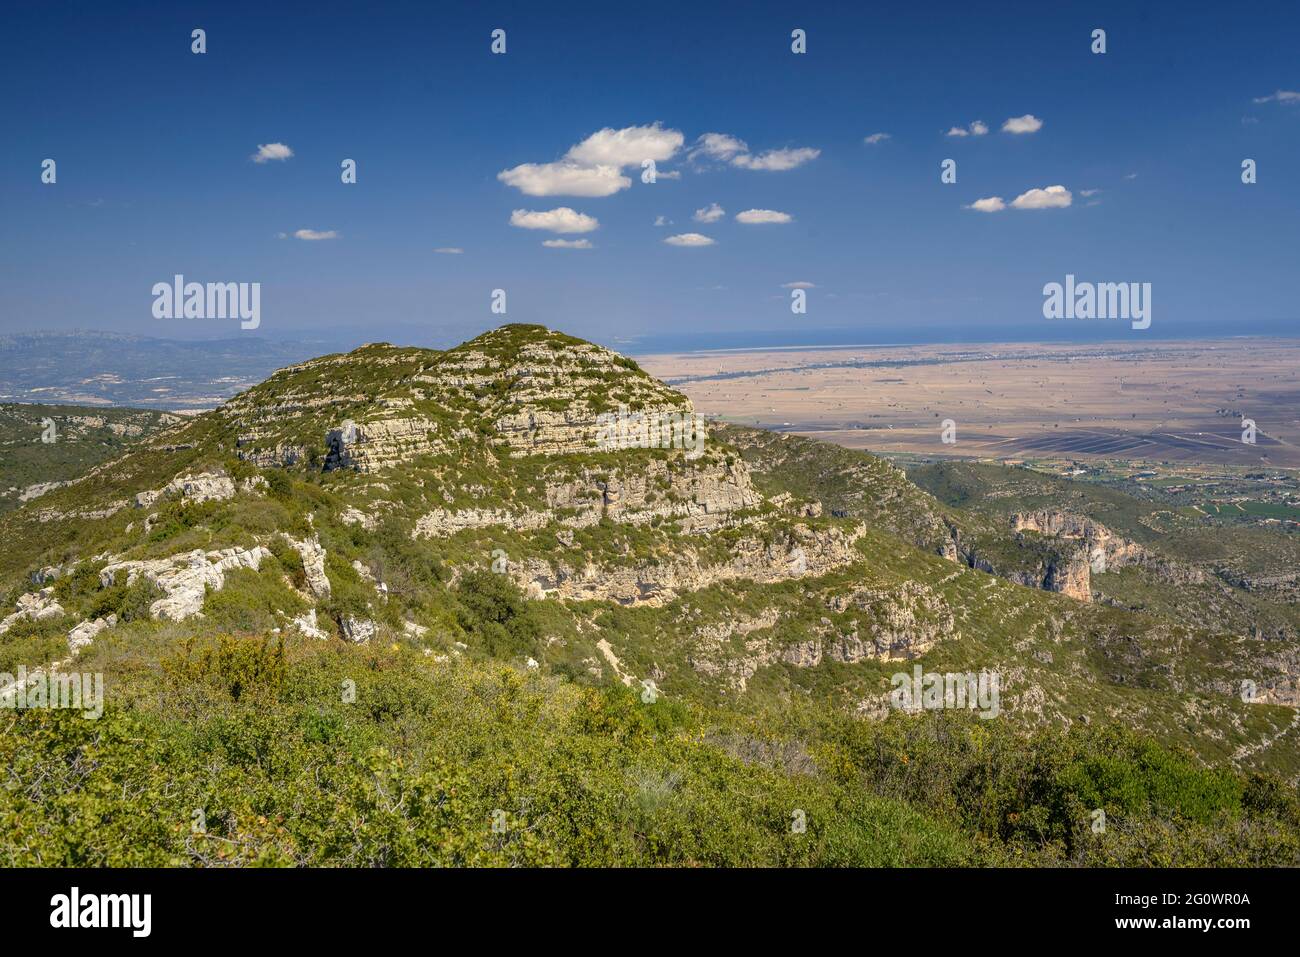 Views from the crest of the Serra de Montsià range looking towards the mountain and, in the background, the Ebro delta (Tarragona, Catalonia, Spain) Stock Photo